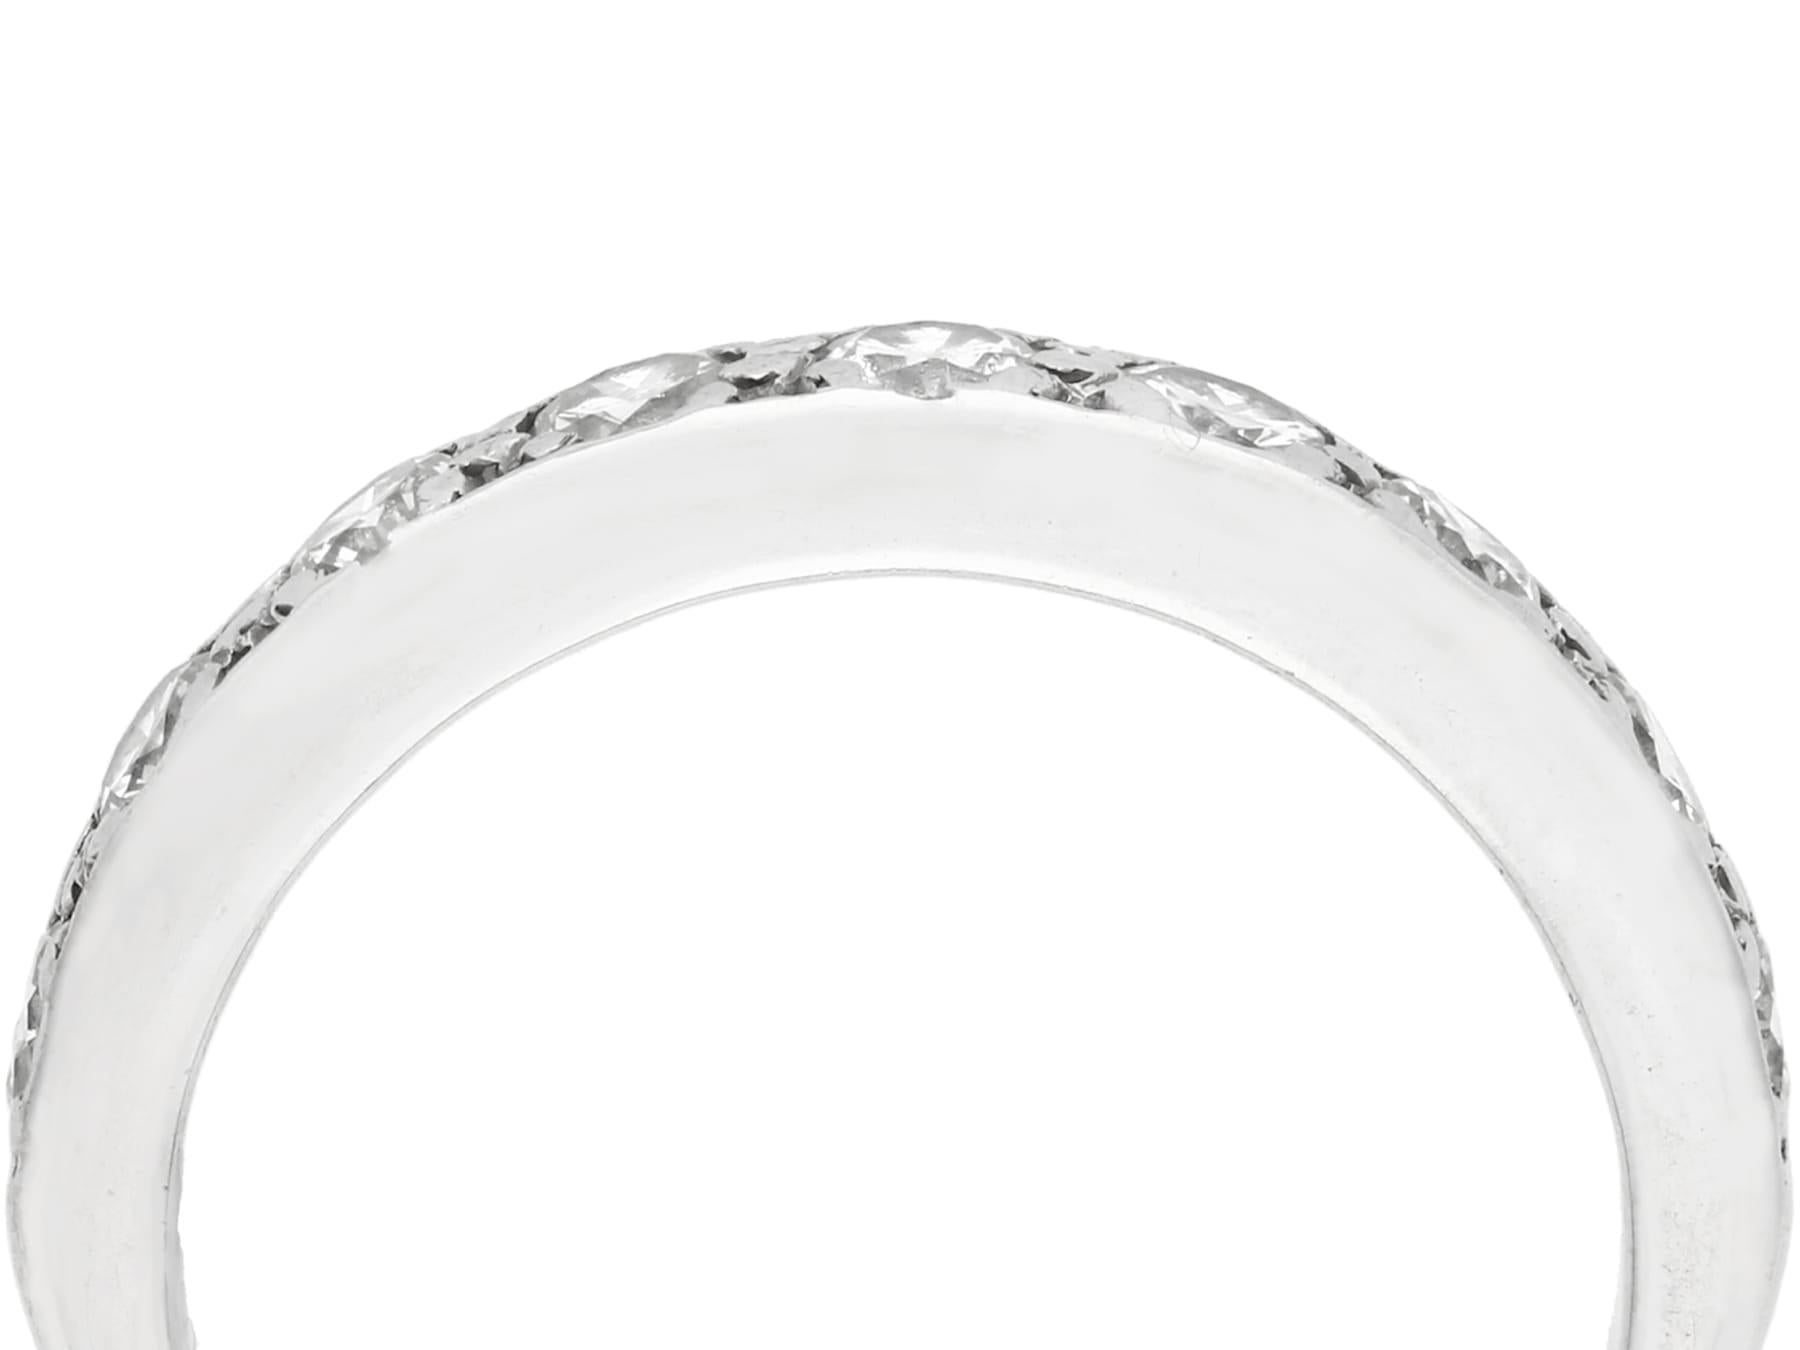 An impressive vintage 0.72 carat diamond and 18 karat white gold half eternity ring; part of our diverse diamond jewelry and estate jewelry collections.

This stunning, fine and impressive vintage eternity ring has been crafted in 18k white